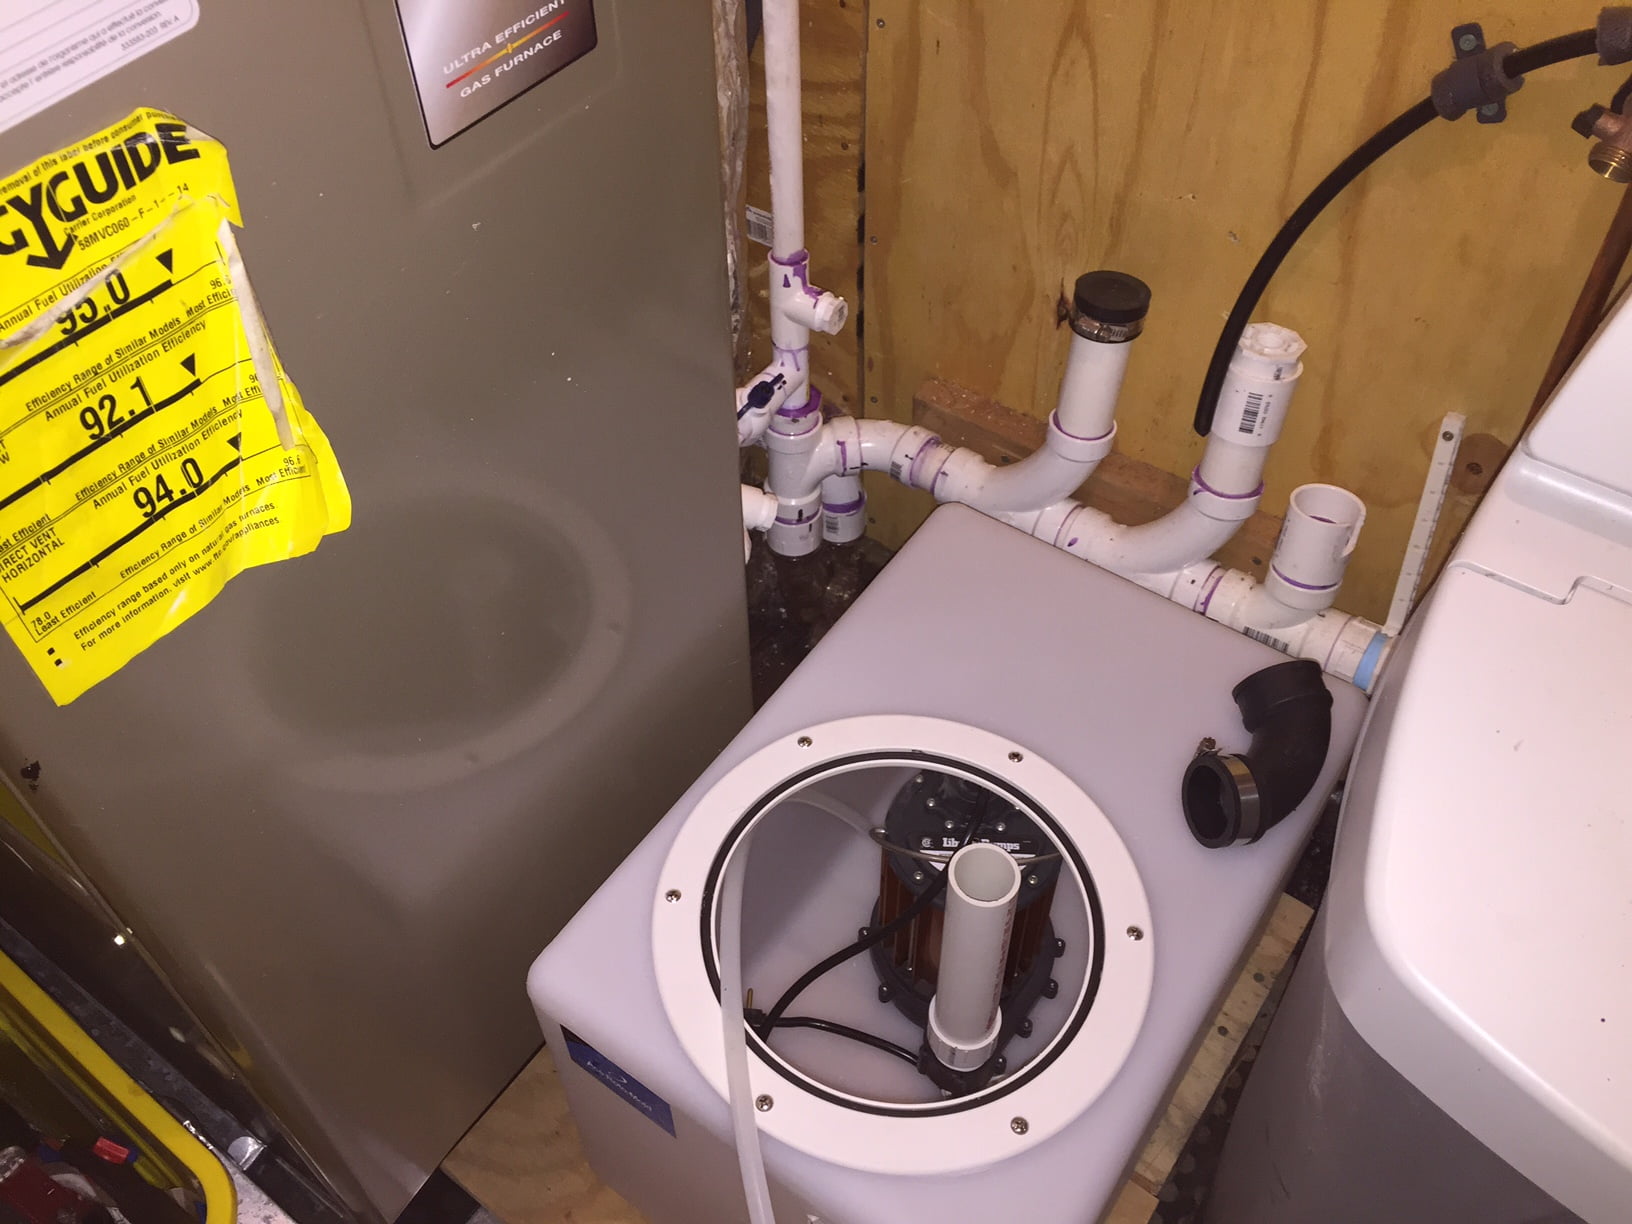 Build a large volume furnace condensate sump system to help avoid frozen septic systems.